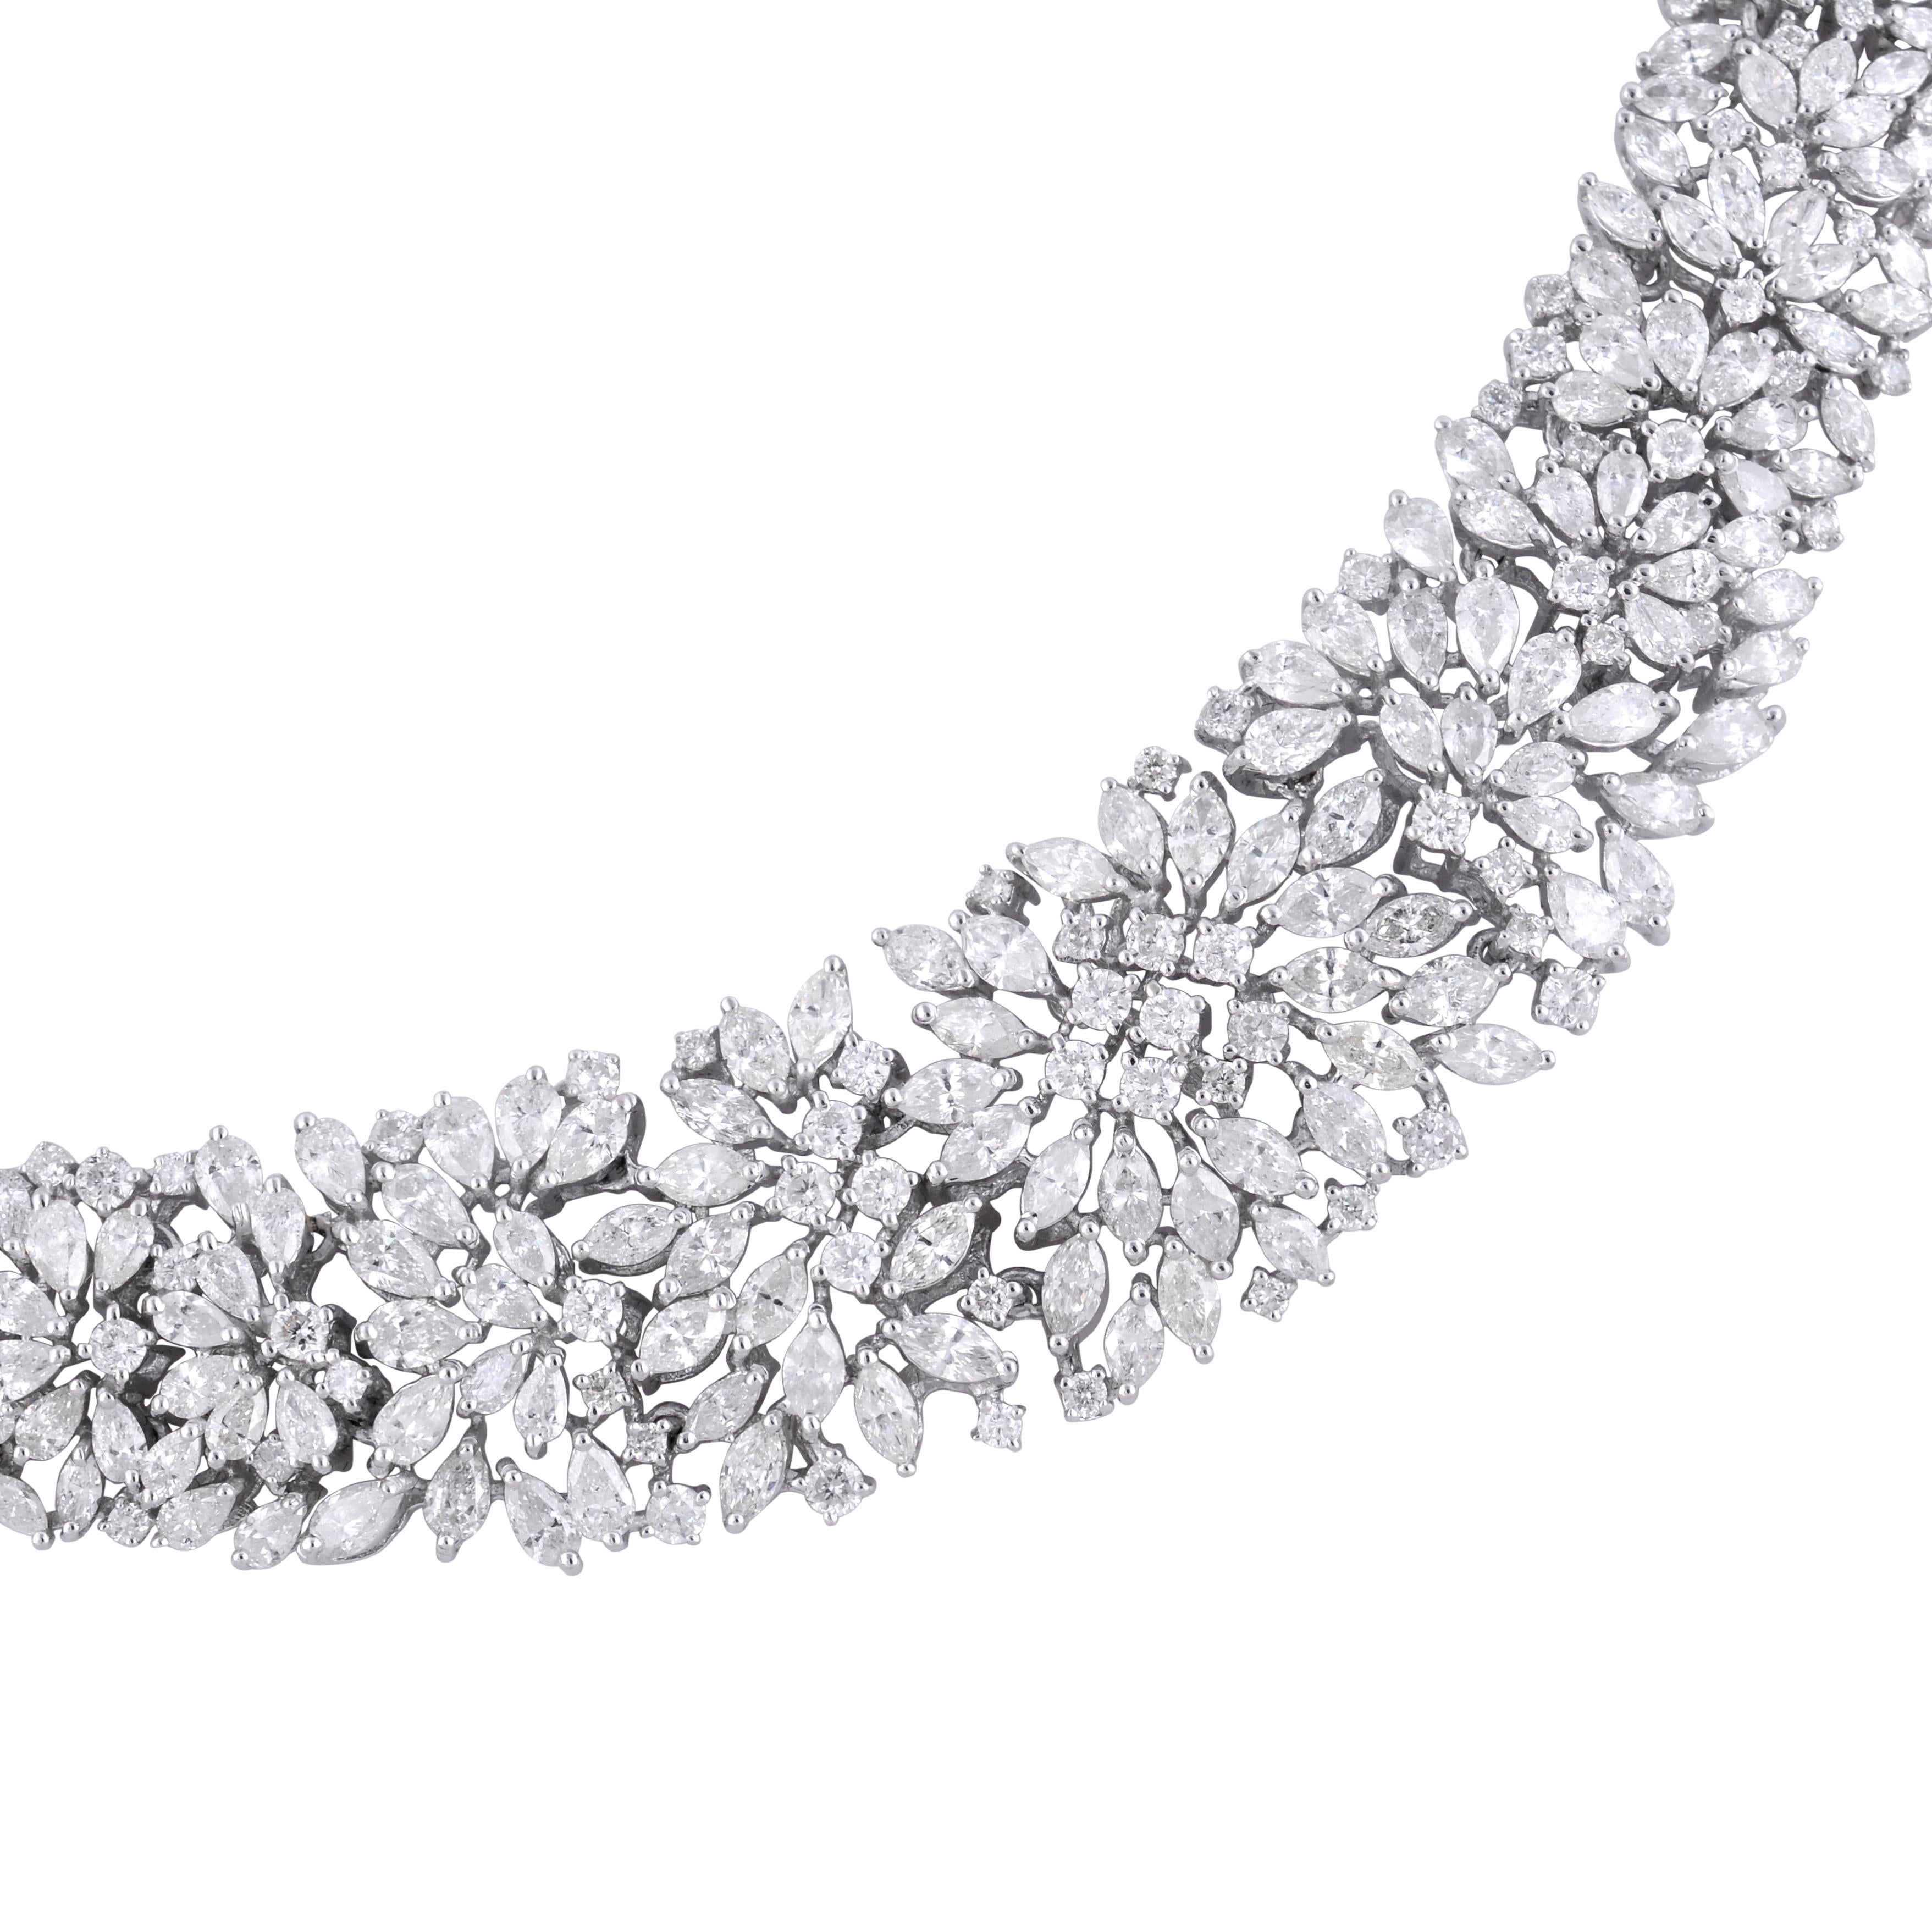 The necklace is designed to gracefully drape around the neck, creating a breathtaking display of shimmering diamonds. The adjustable chain length allows for versatility, ensuring a perfect fit and the ability to customize the necklace to your